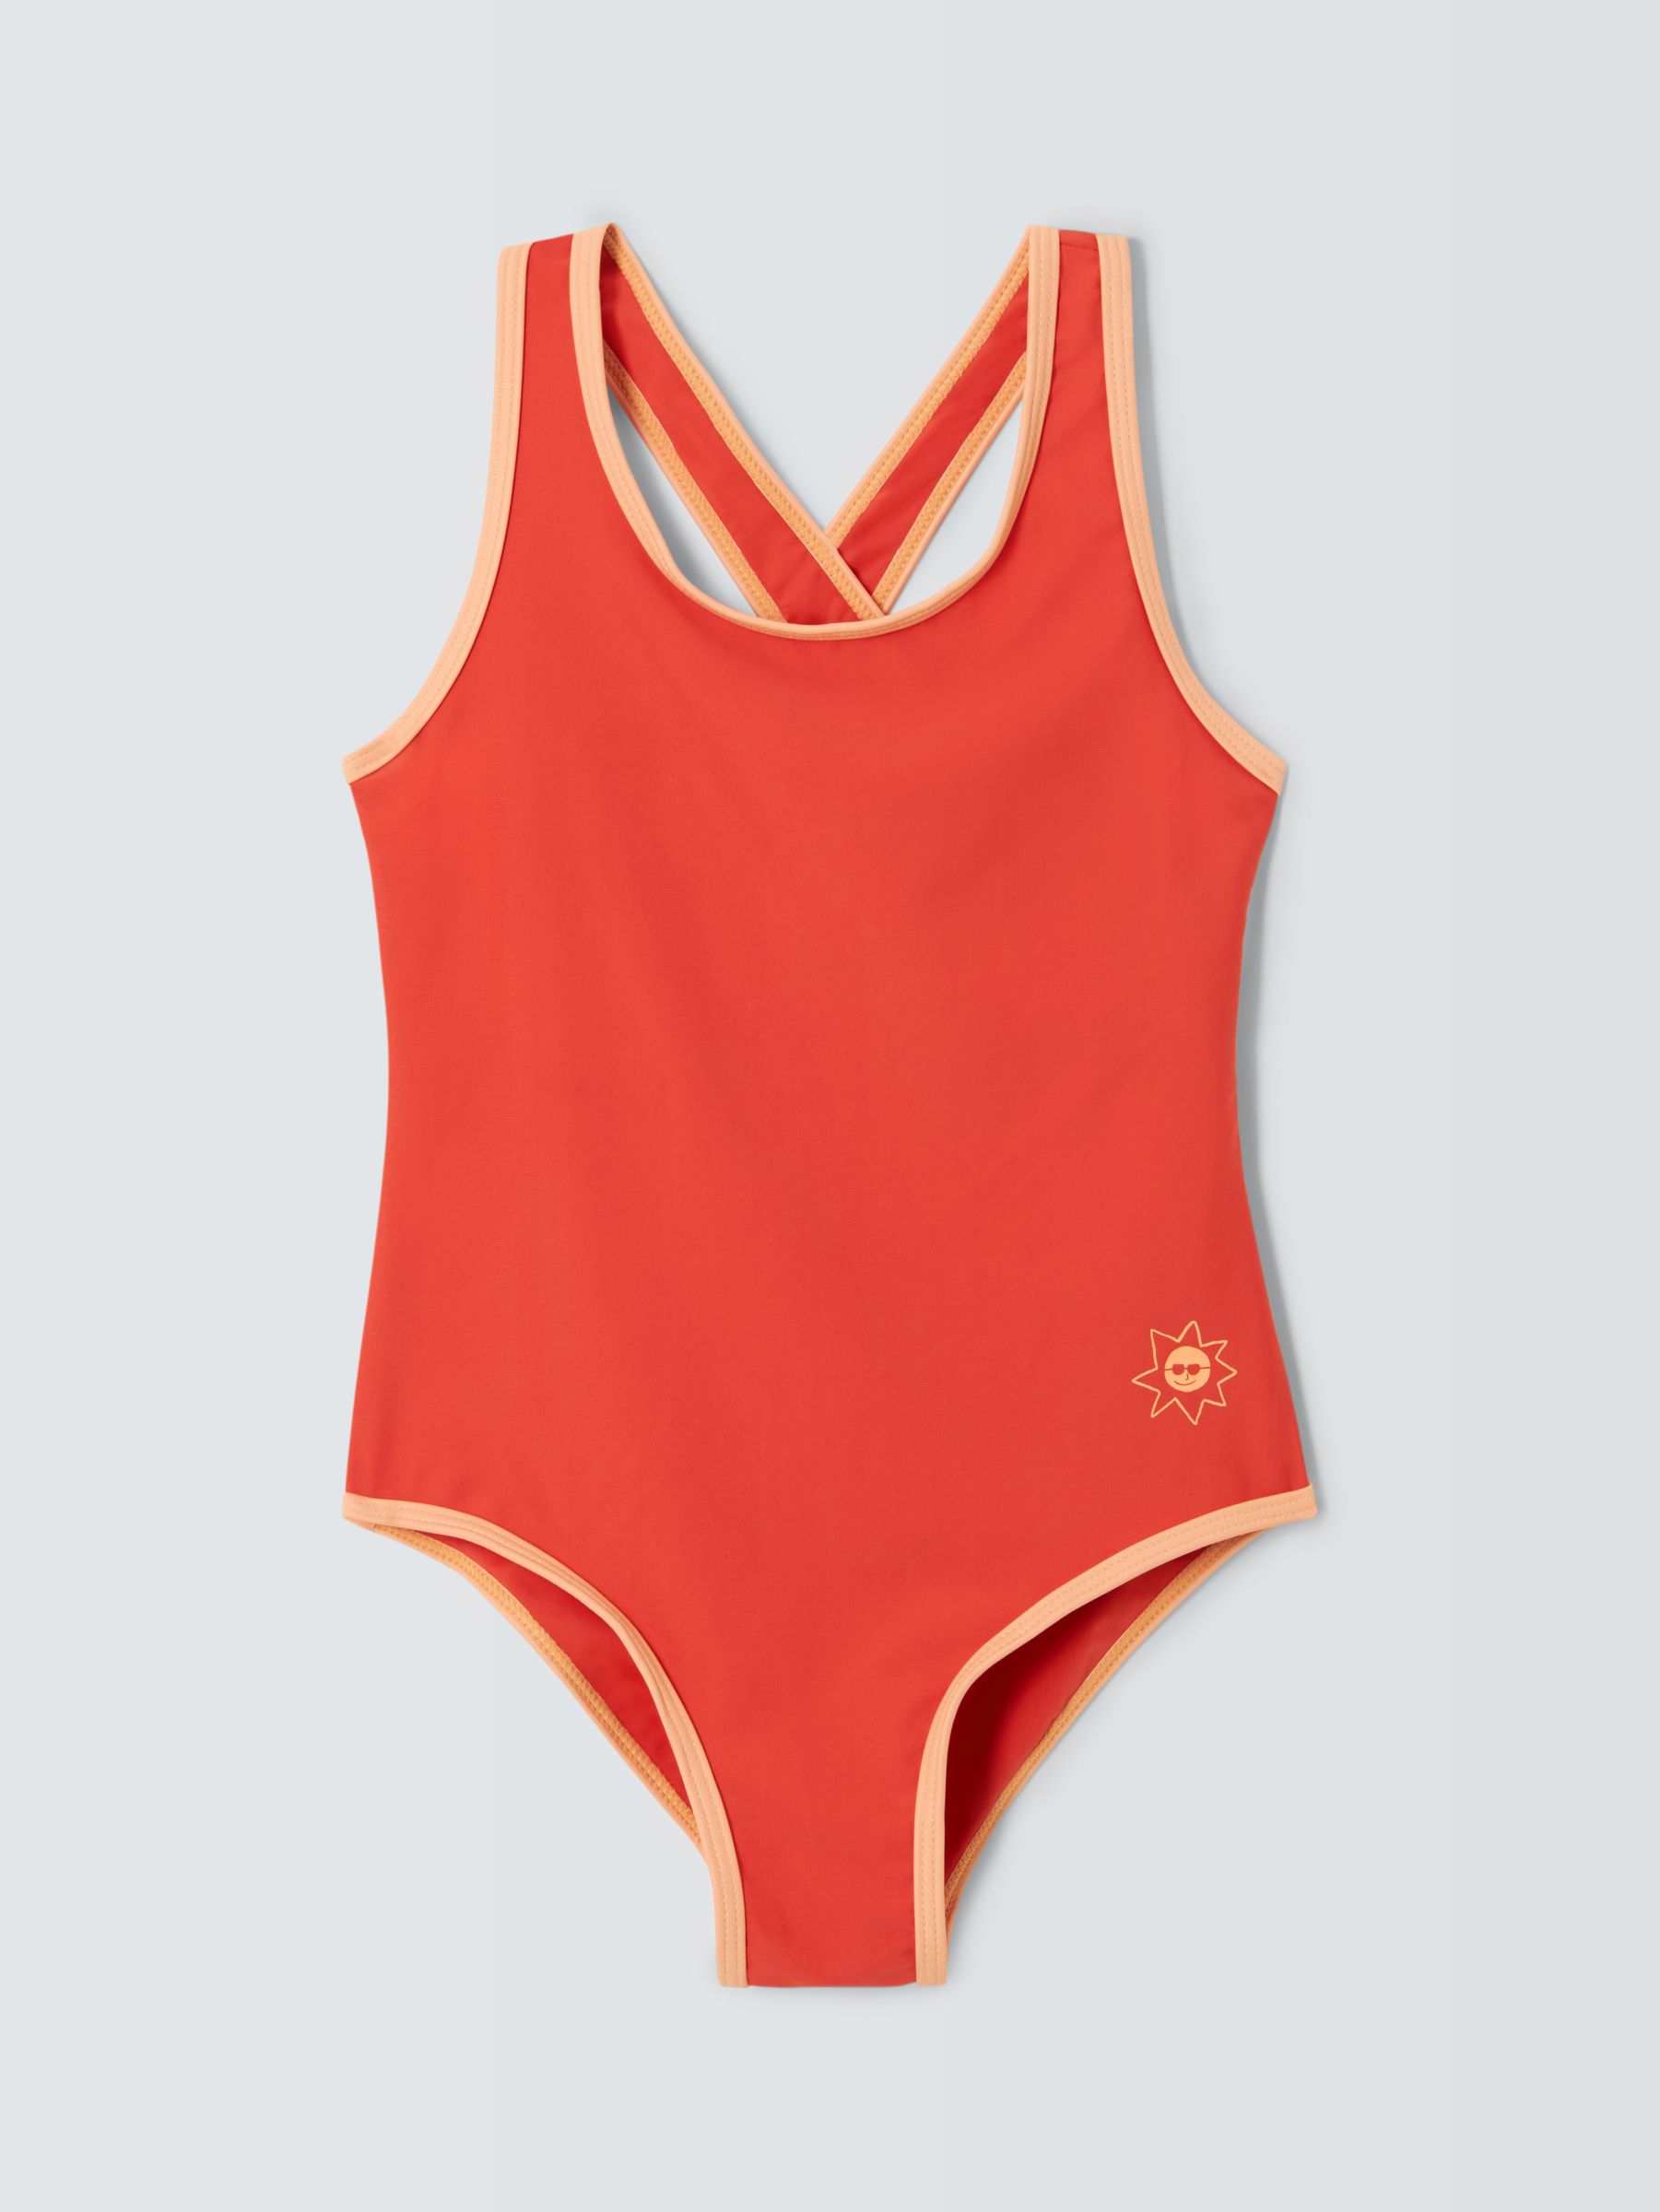 John Lewis ANYDAY Kids' Sun Swimsuit, Red, 9 years